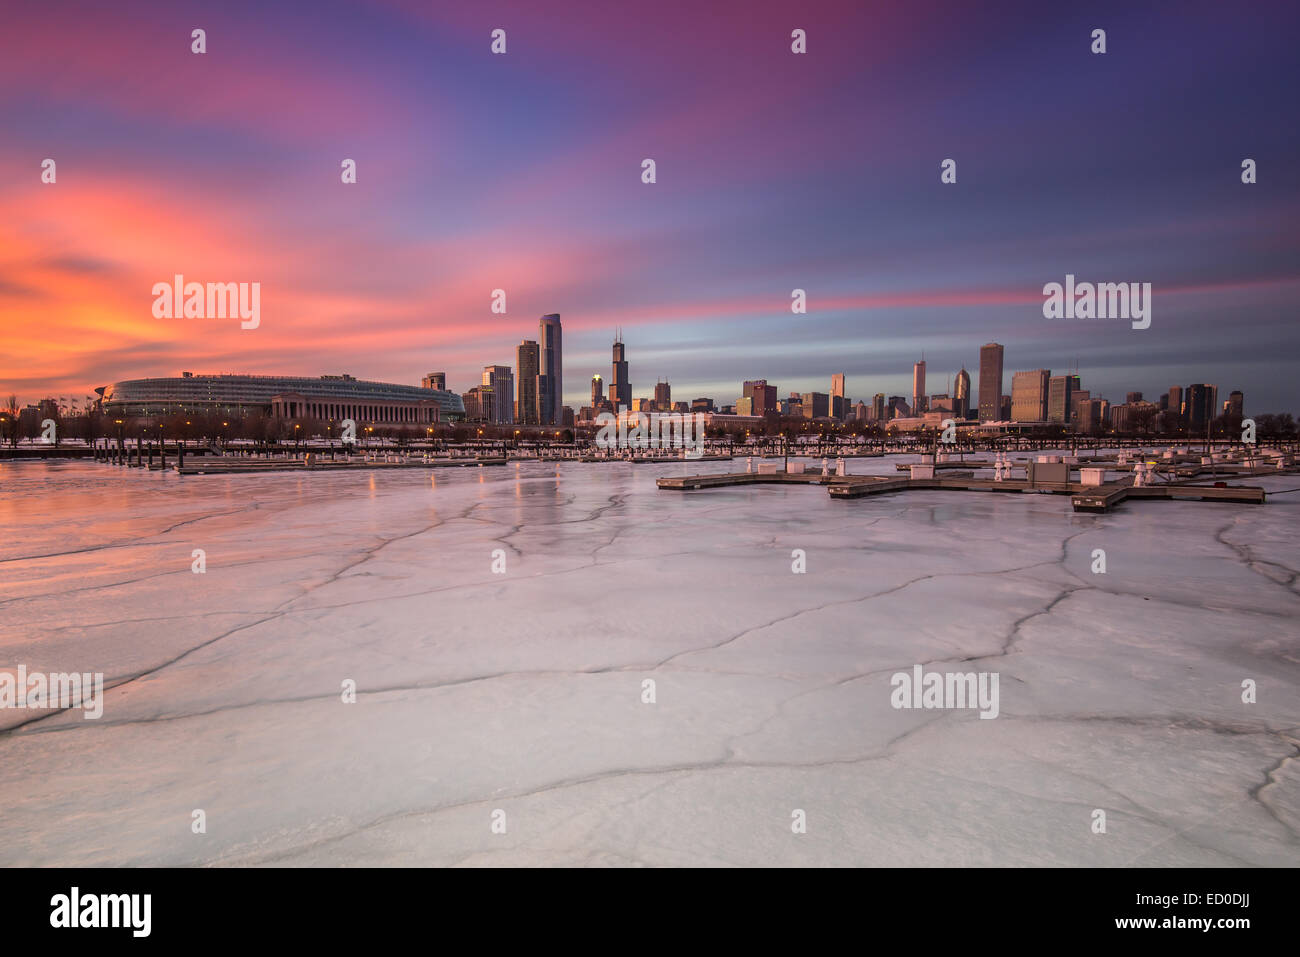 Downtown city skyline and frozen harbour in winter, Chicago, Illinois, USA Stock Photo